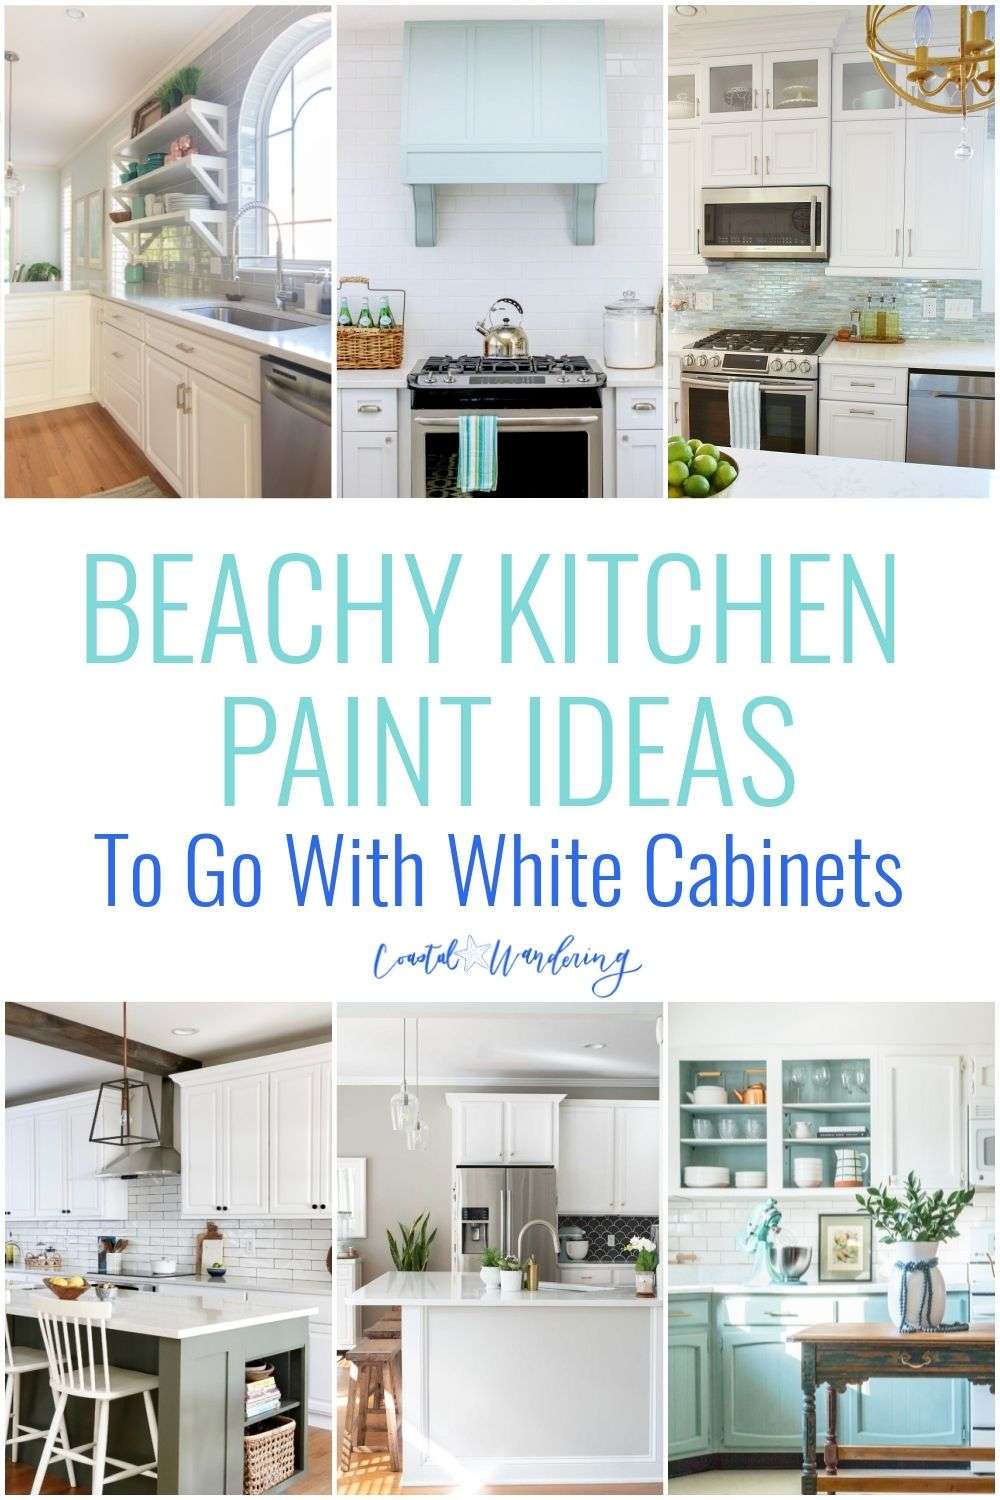 18 Beachy Kitchen Paint Ideas To Go With White Cabinets   Coastal ...